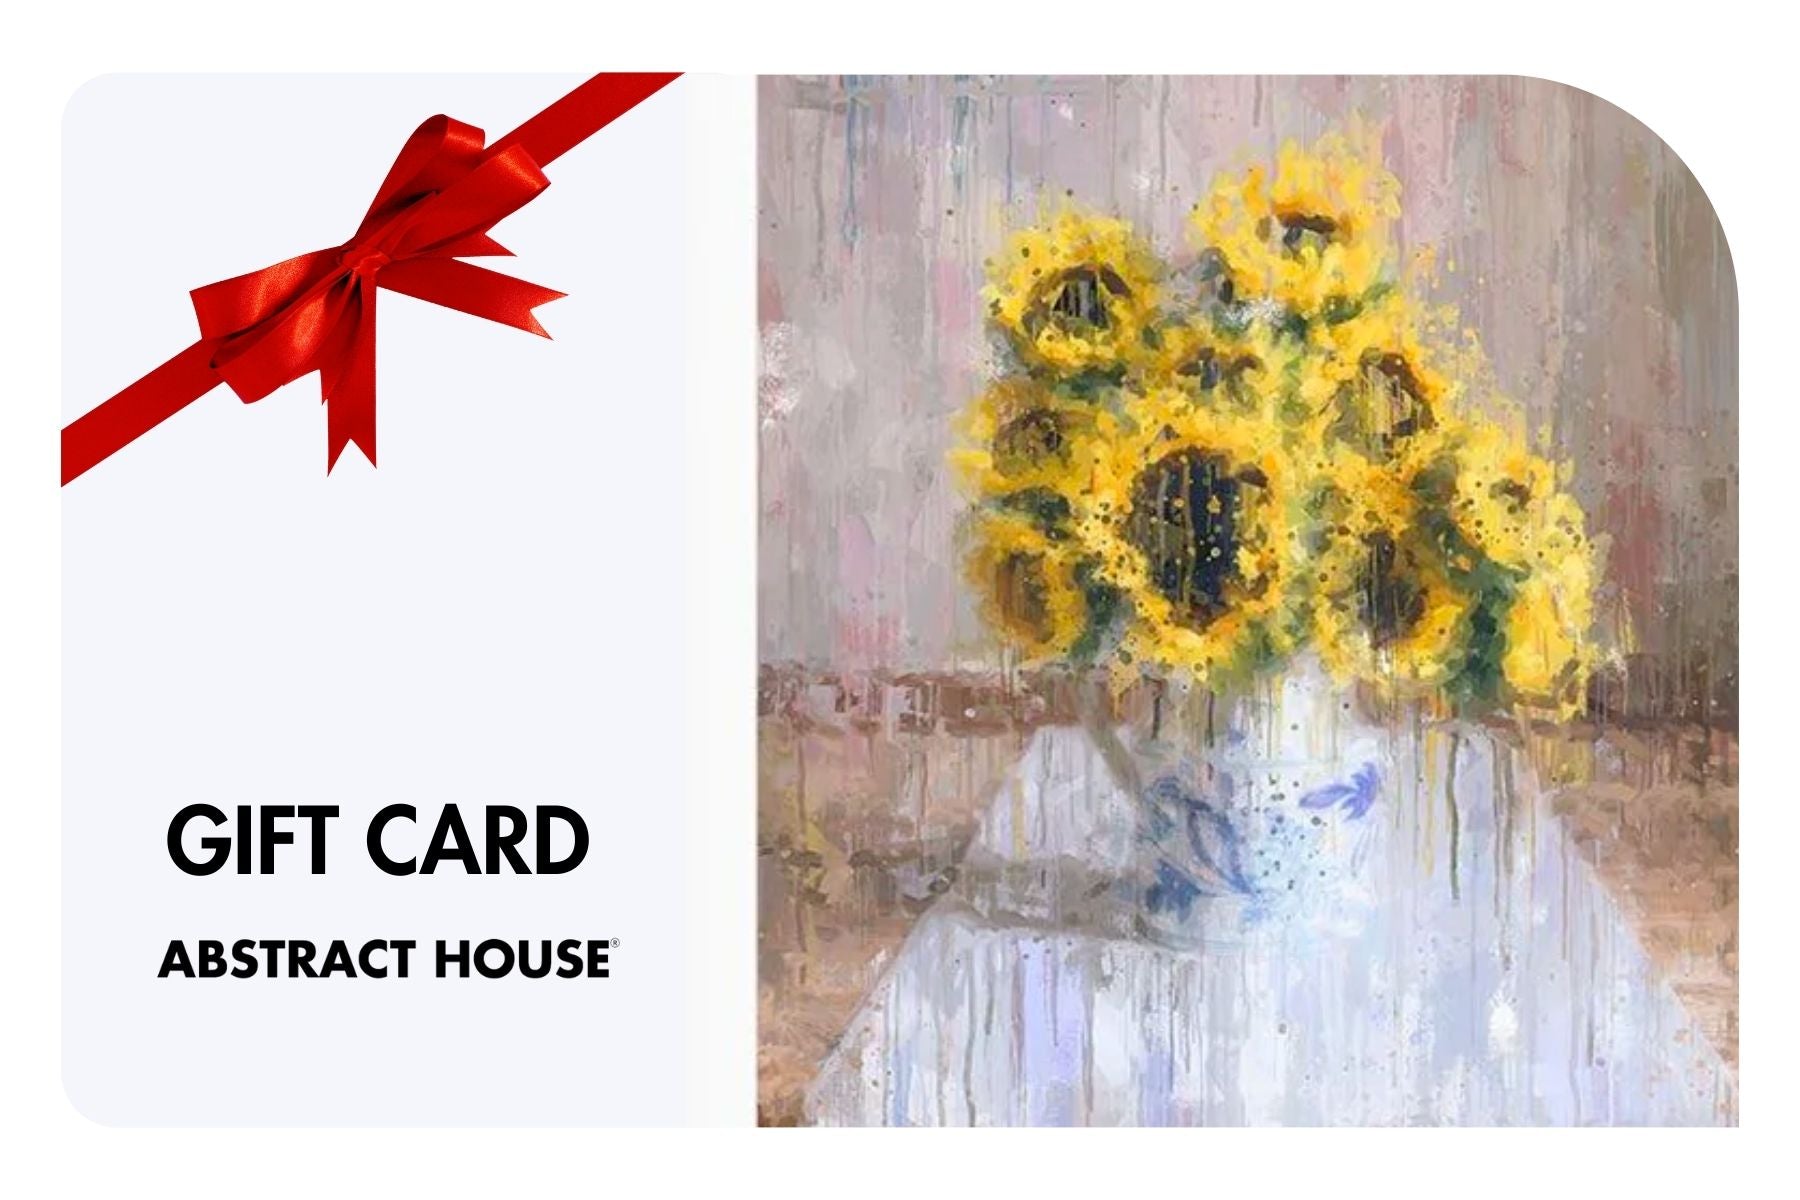 Gift Card: Let Them Choose-Abstract House